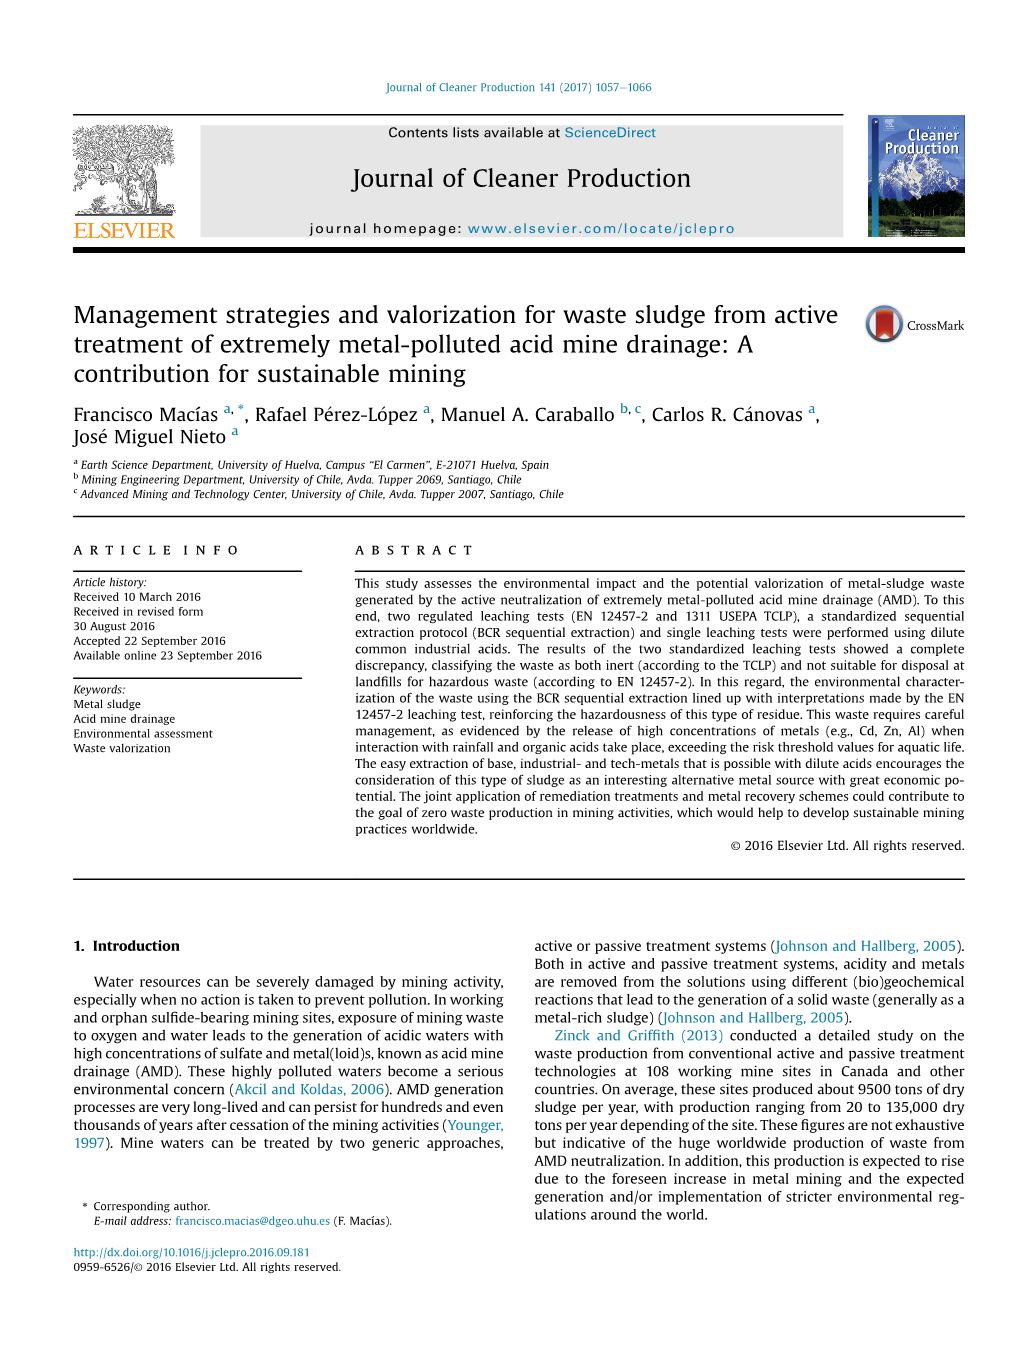 Management Strategies and Valorization for Waste Sludge from Active Treatment of Extremely Metal-Polluted Acid Mine Drainage: a Contribution for Sustainable Mining